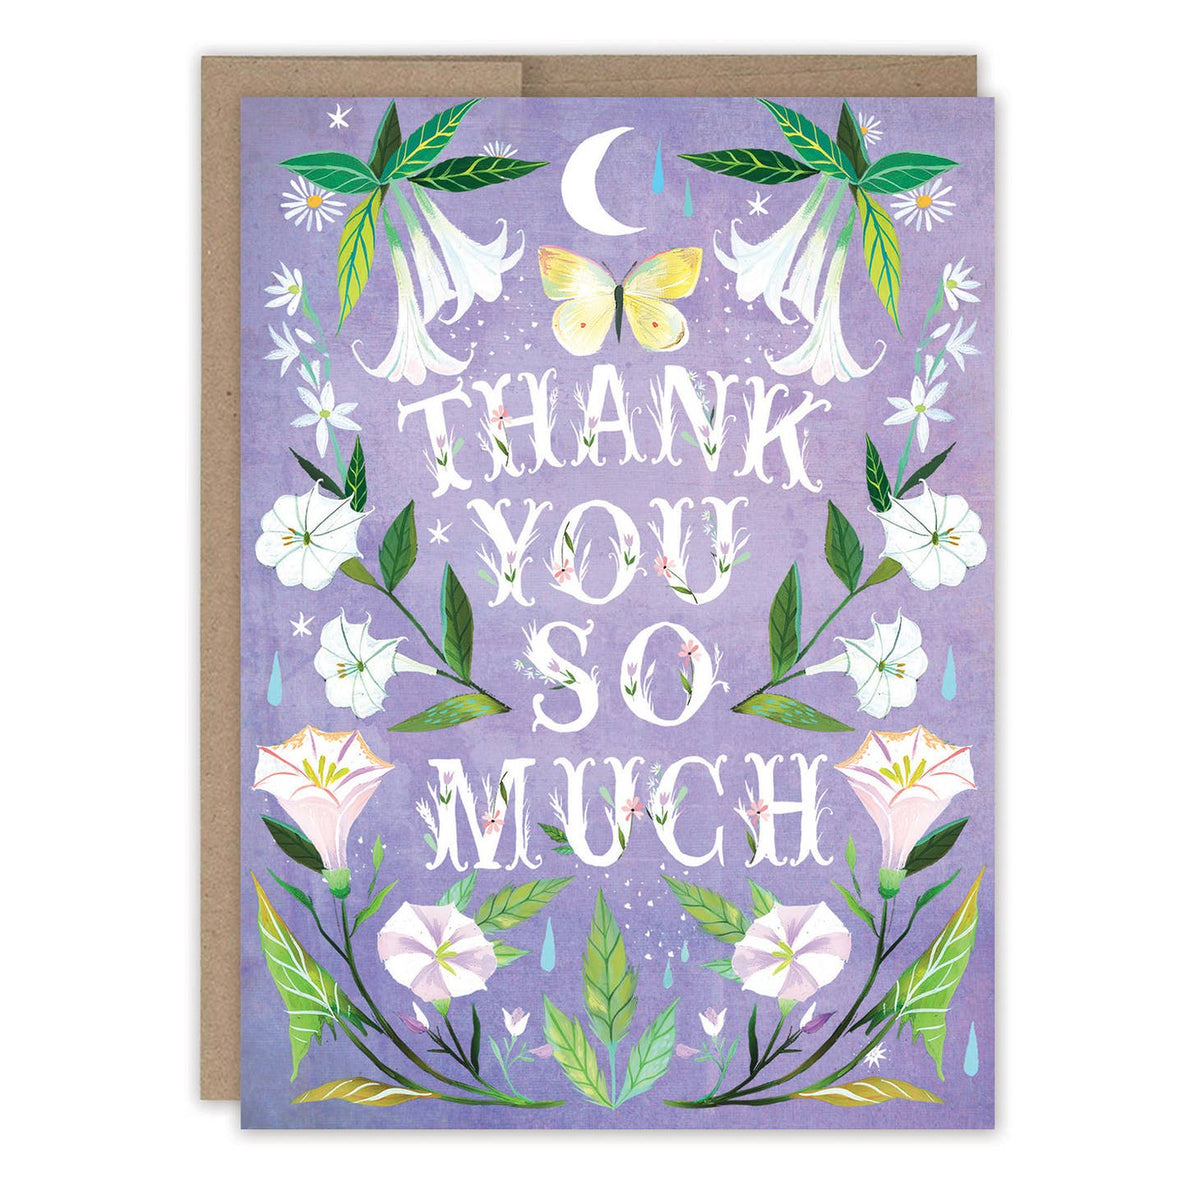 Biely &amp; Shoaf Lavender Moonflowers Thank You Card